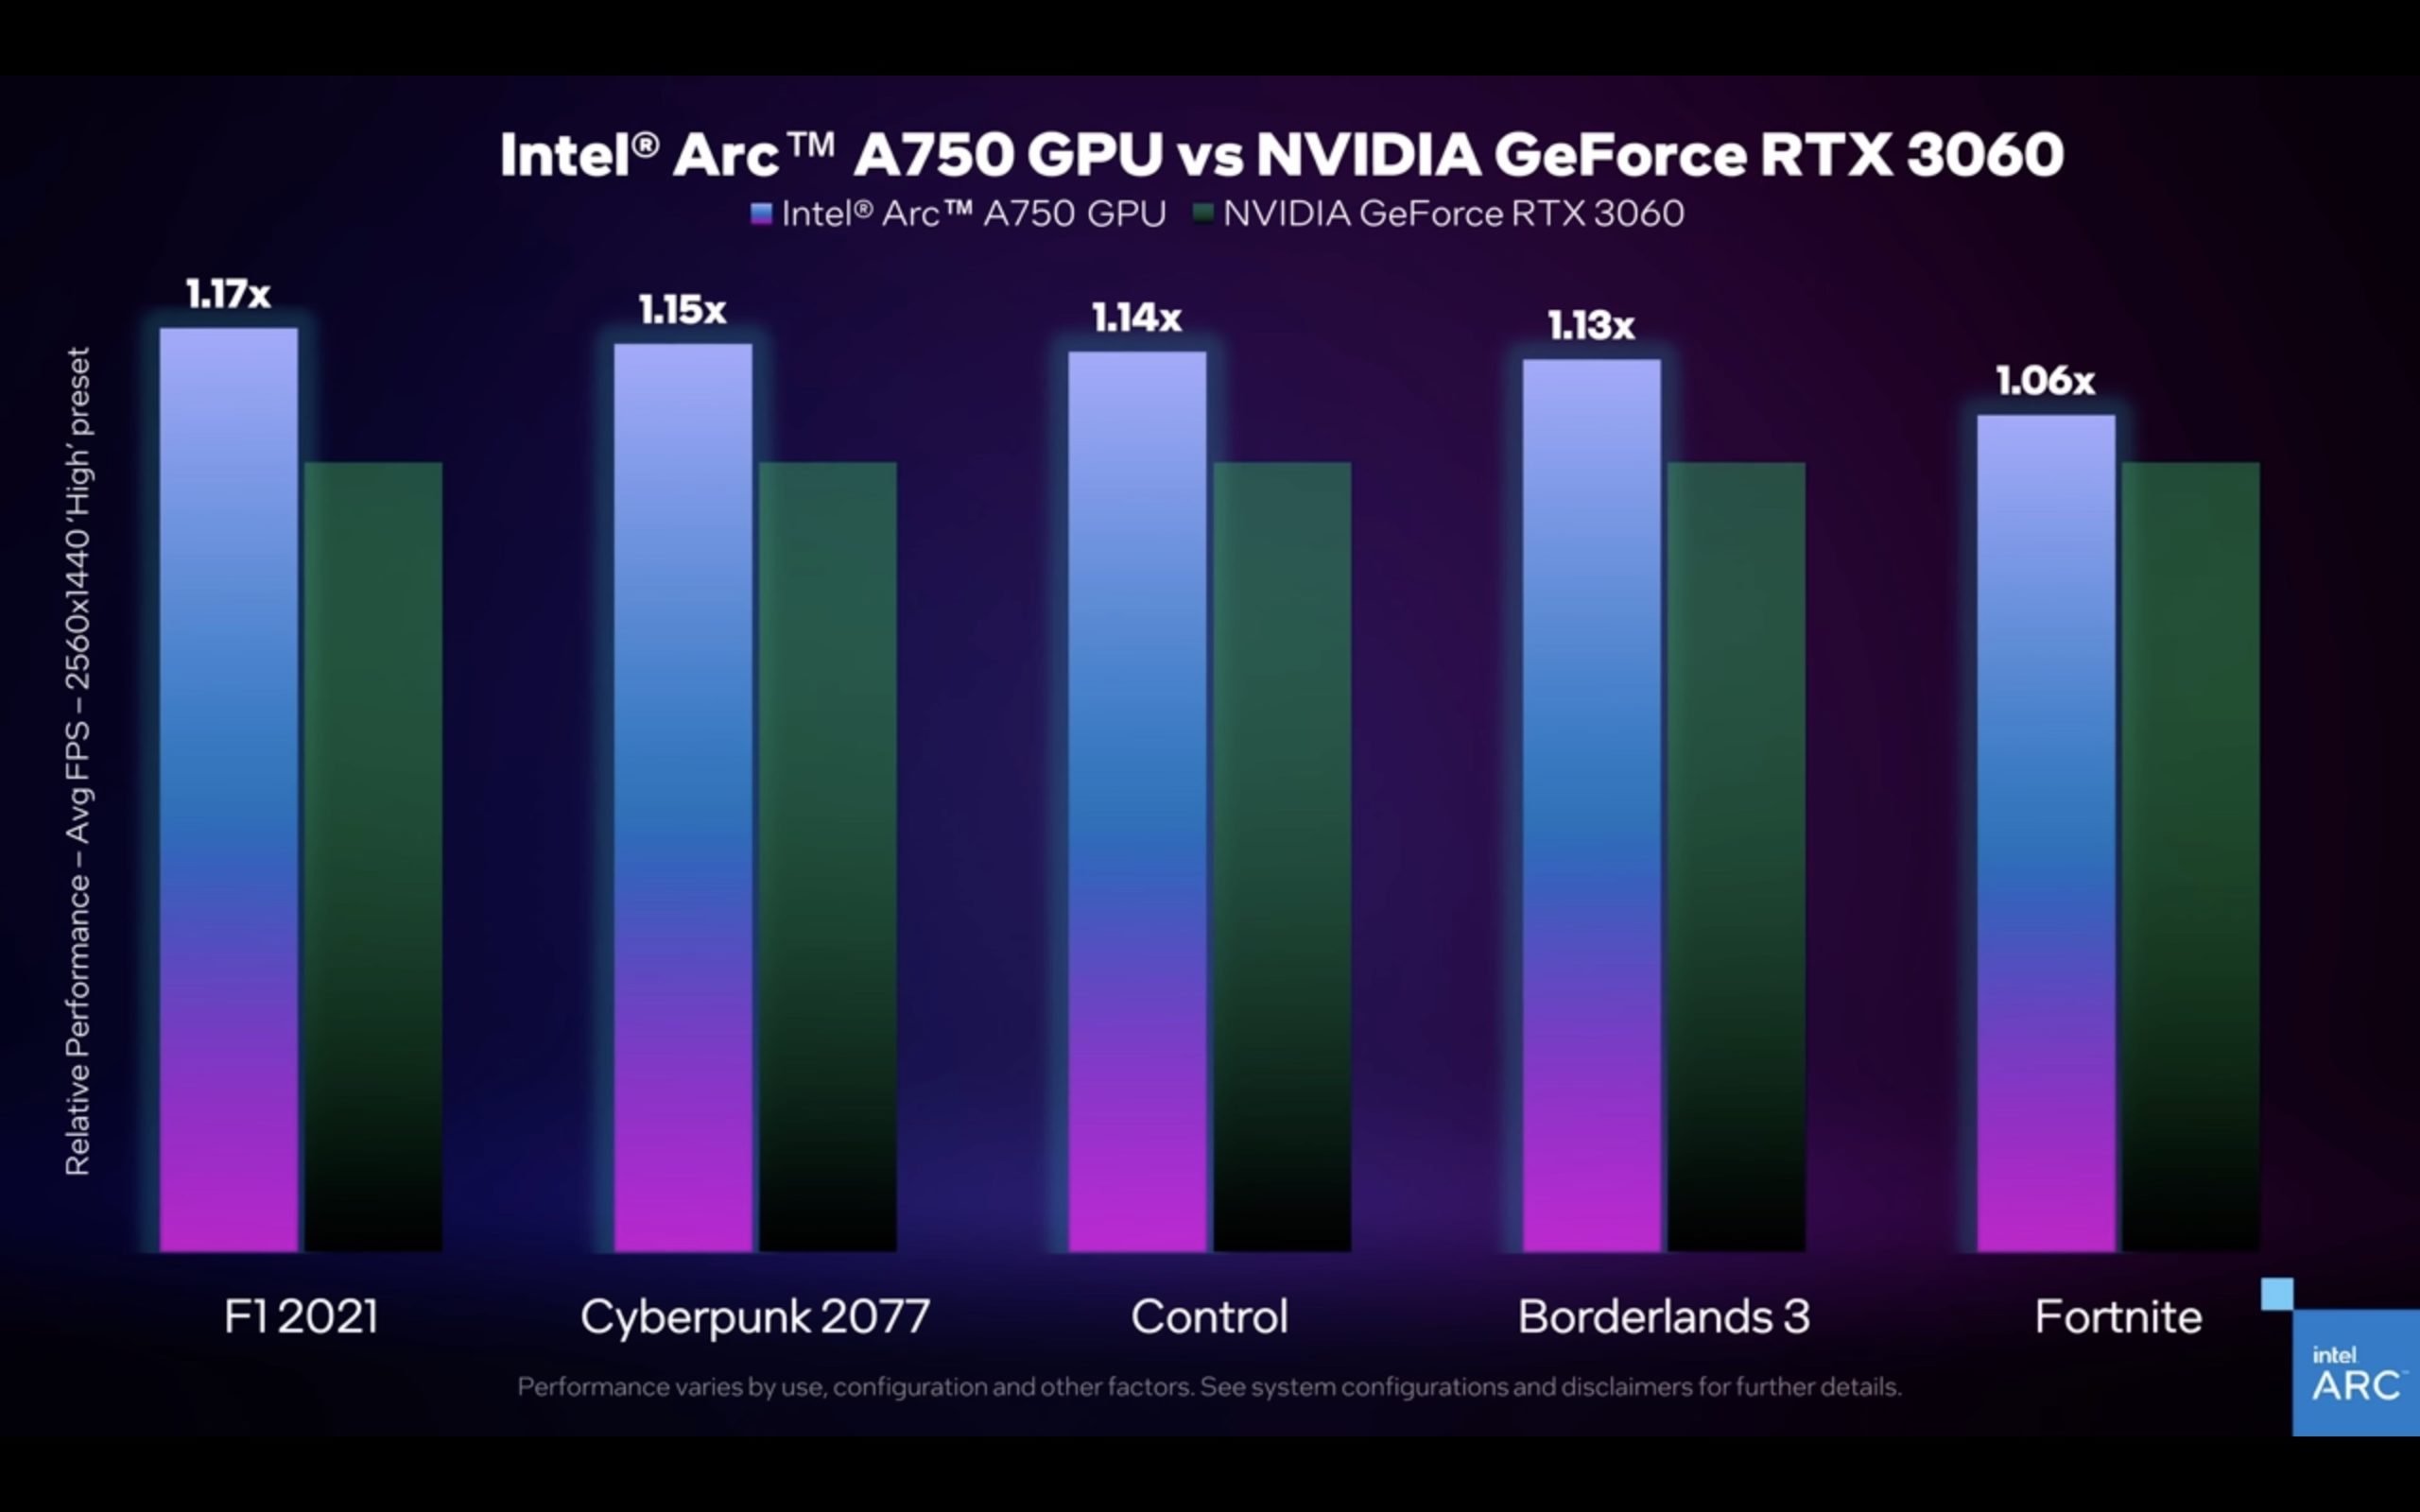 Intel has set low expectations for its Arc GPUs